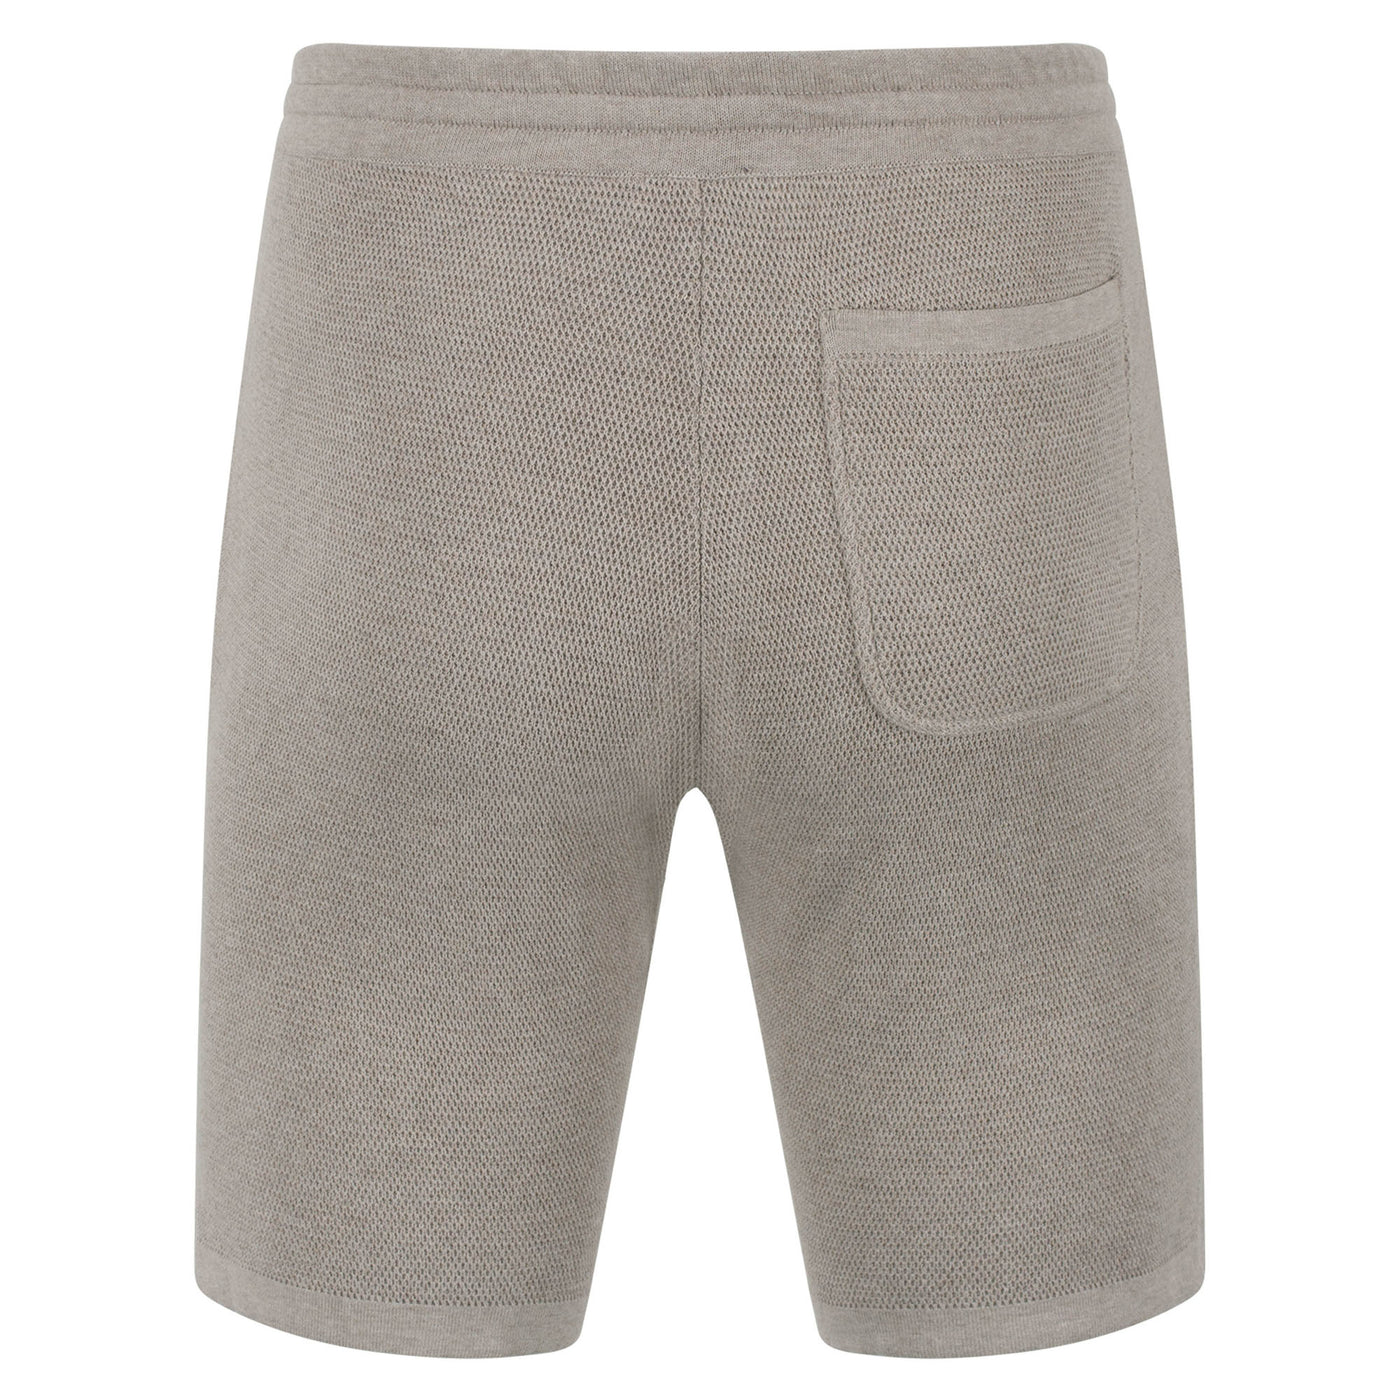 mens beige knitted shorts